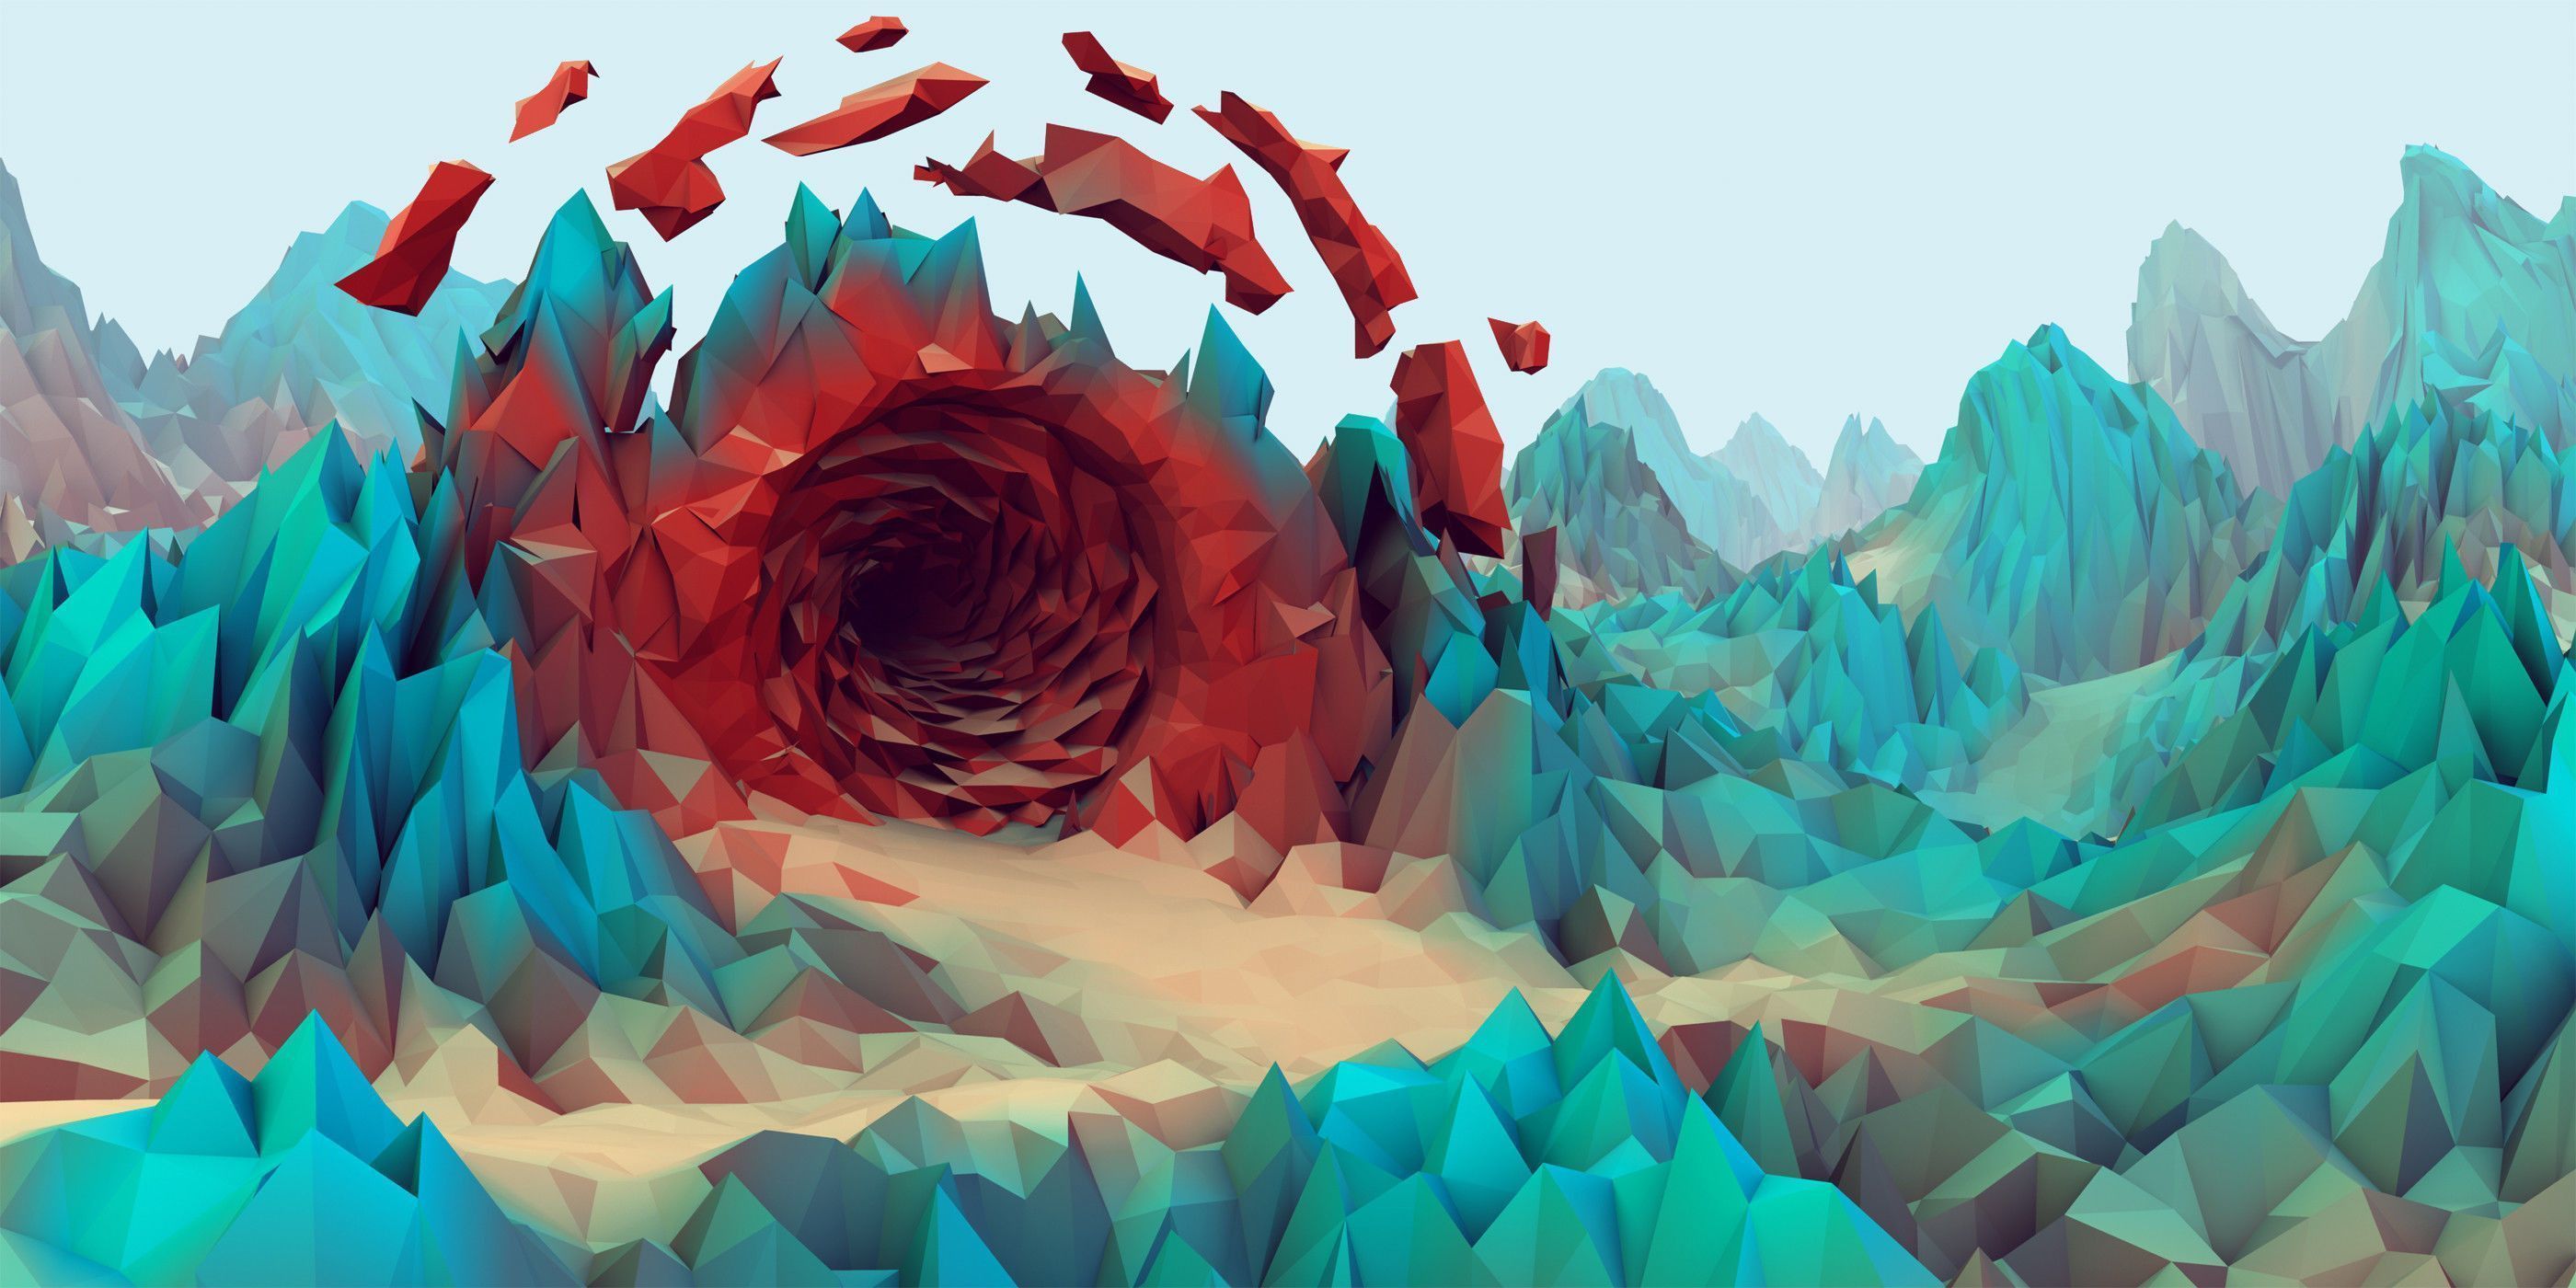 A low poly landscape with mountains and red rocks - Low poly